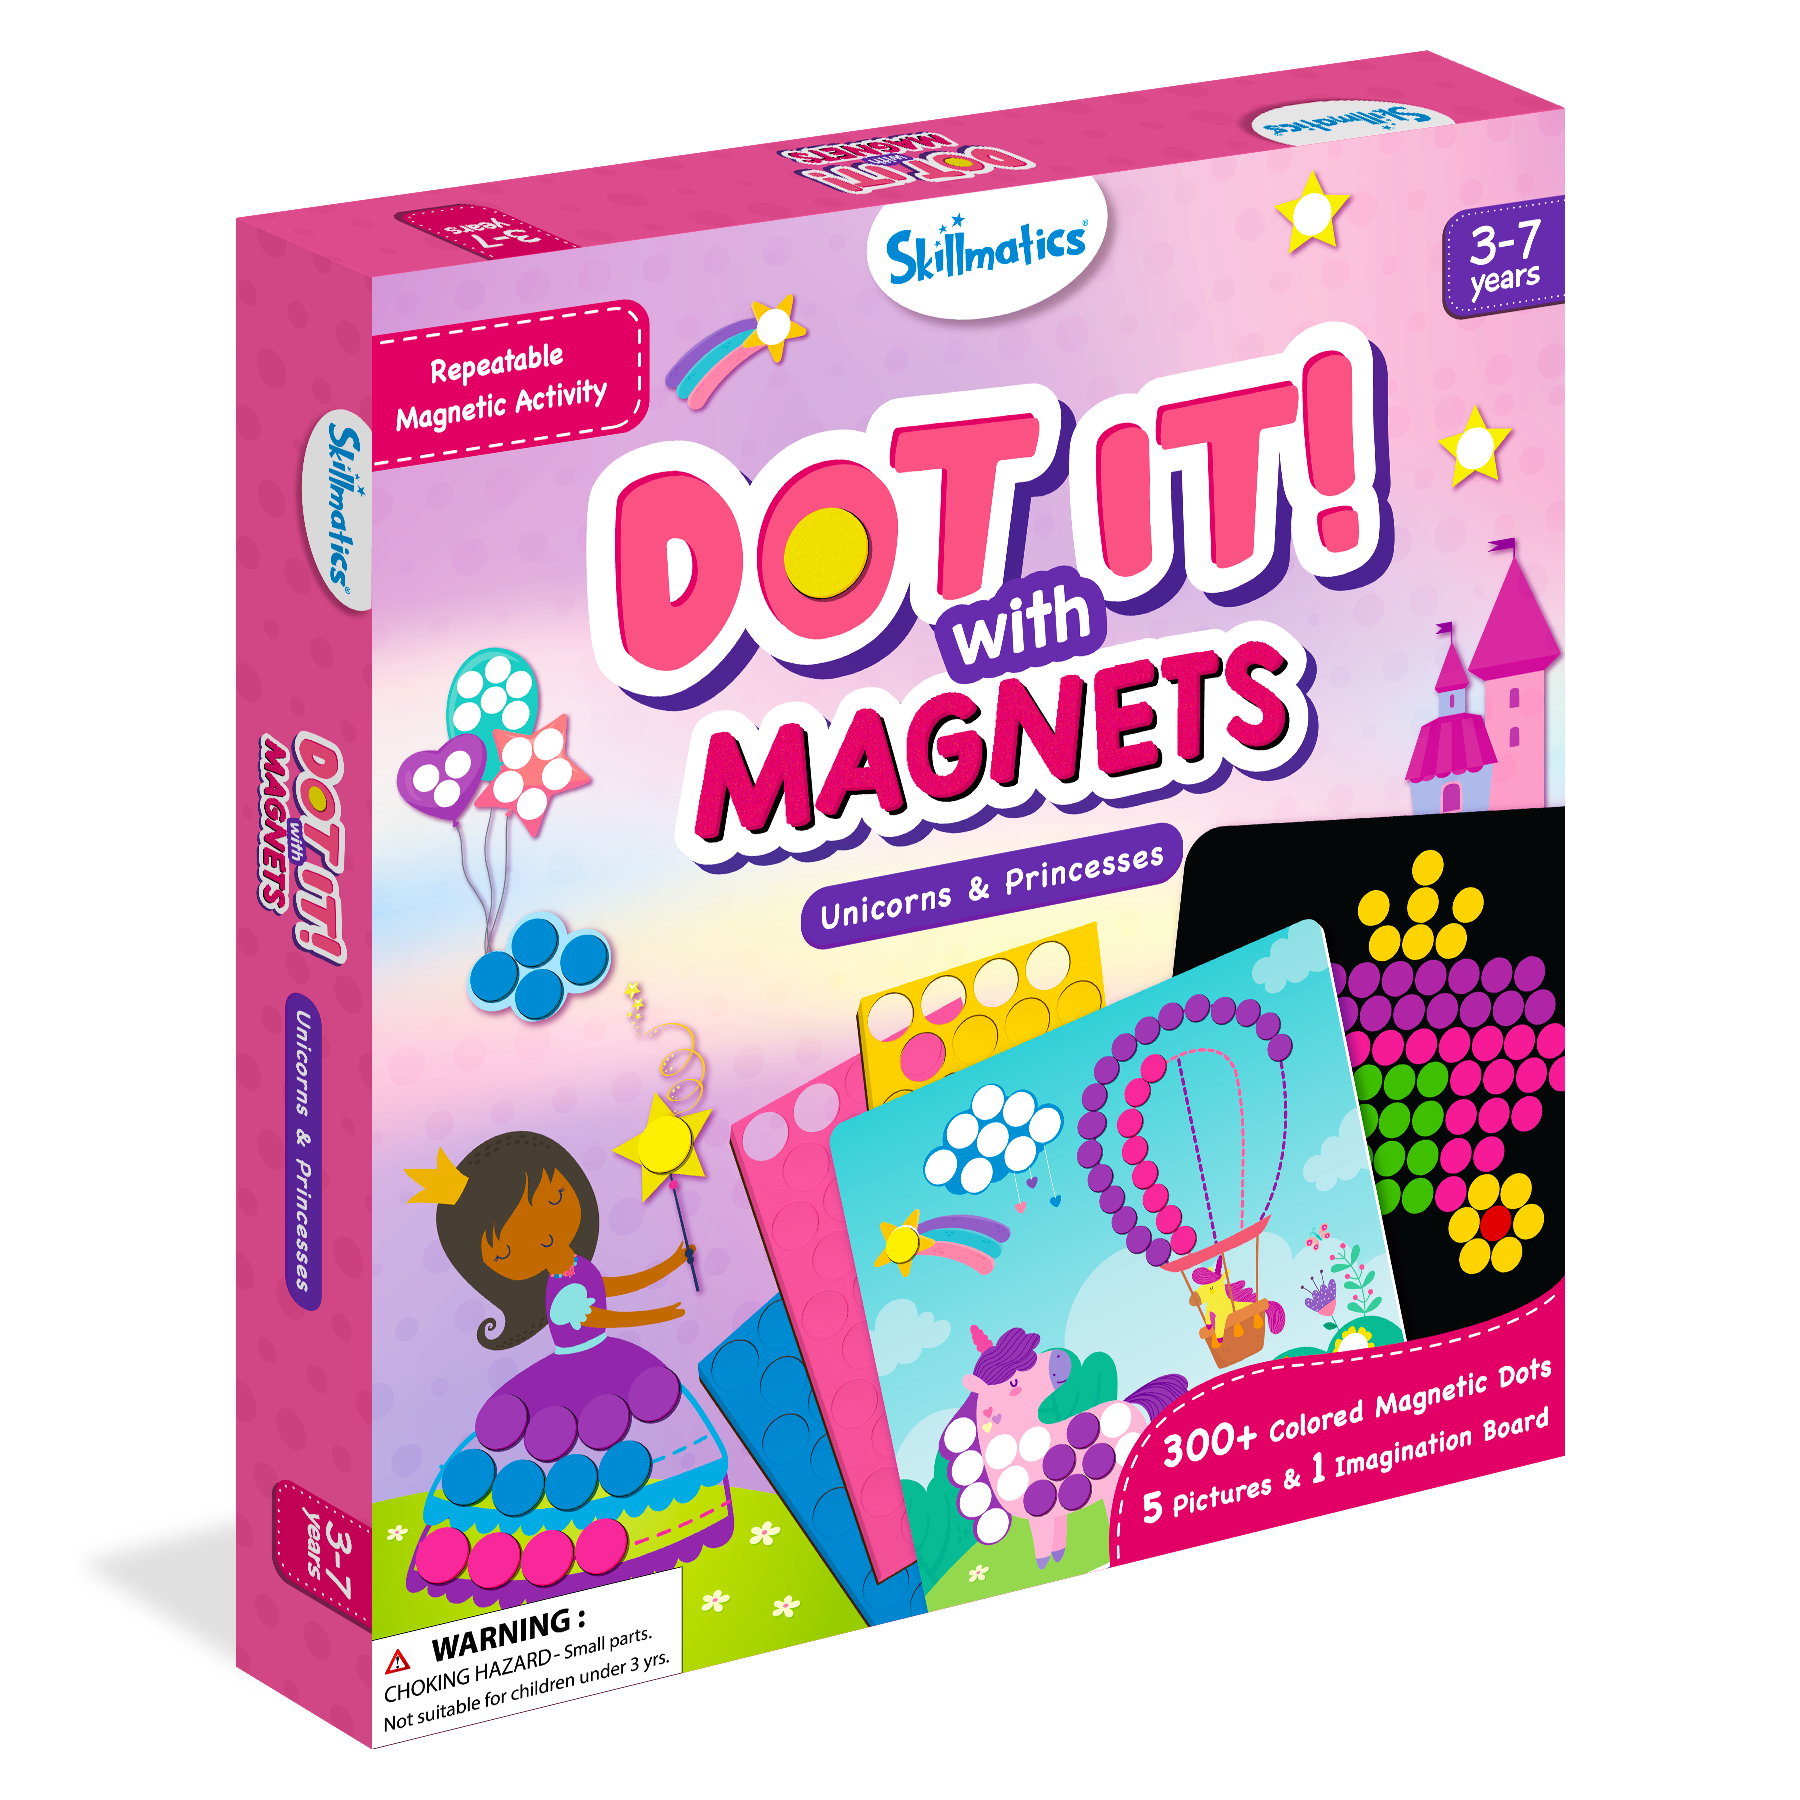 Skillmatics Art Activity Dot It with Magnets - Unicorns & Princesses, No Mess Repeatable Art for Kids, Craft Kits, DIY Activity, Gifts for Ages 4 to 7